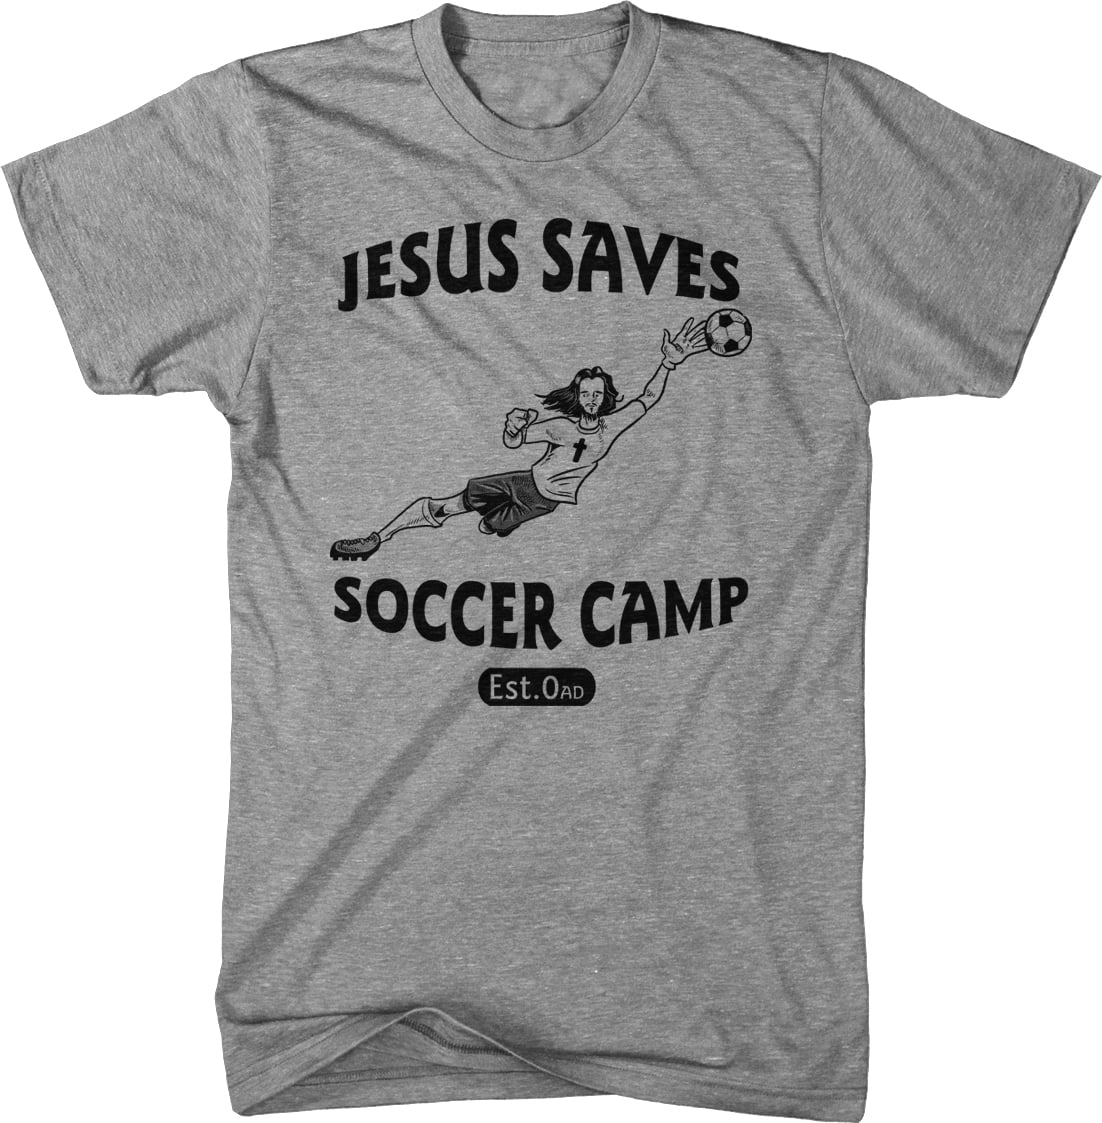 Jesus Saves Soccer Goalie T Shirt Funny Religion Football Sports Tee  (Heather Grey) - XL Graphic Tees 